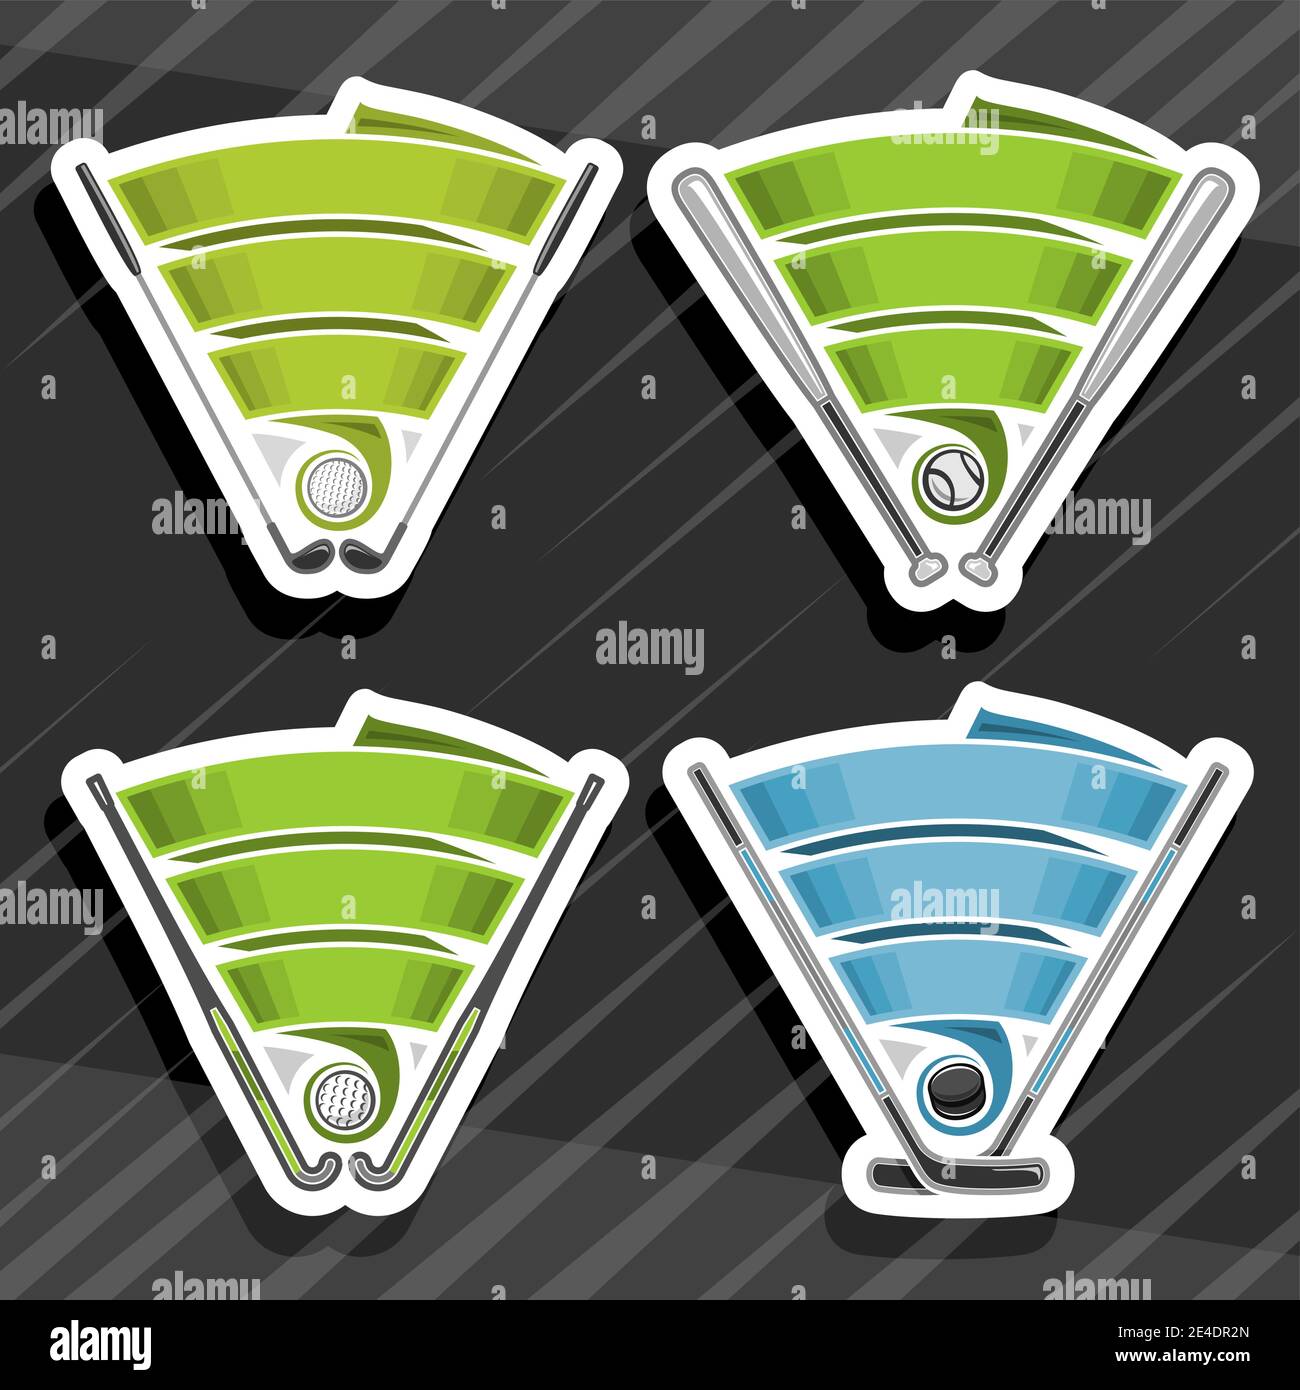 Vector set of Sports Logos with copy space for text, 4 isolated badges with illustrations of sport balls and sticks, green and blue decorative ribbons Stock Vector